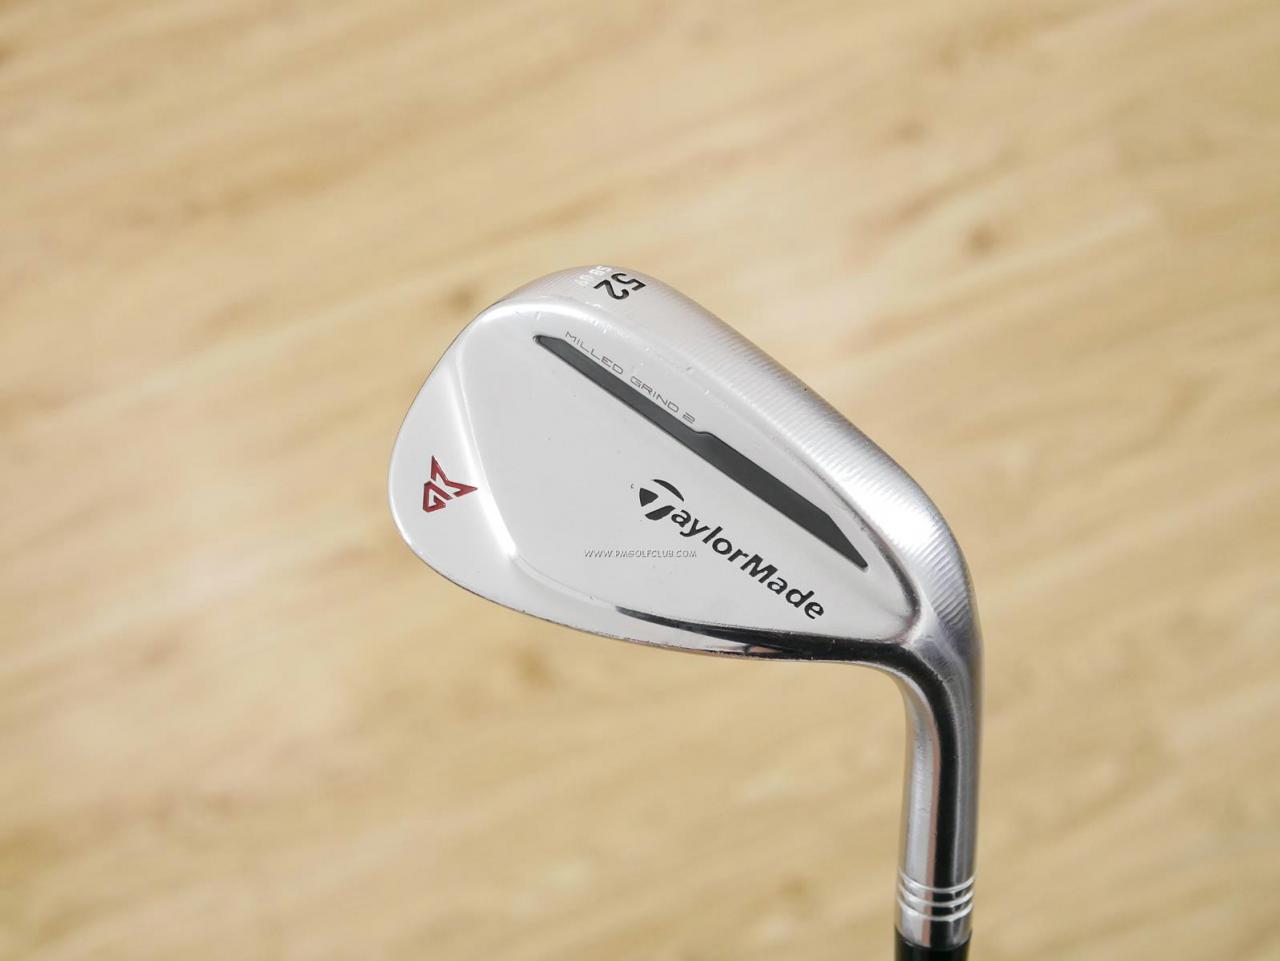 Wedge : Taylormade : Wedge Taylormade Milled Grind 2 Loft 52 ก้านเหล็ก Dynamic Gold S200